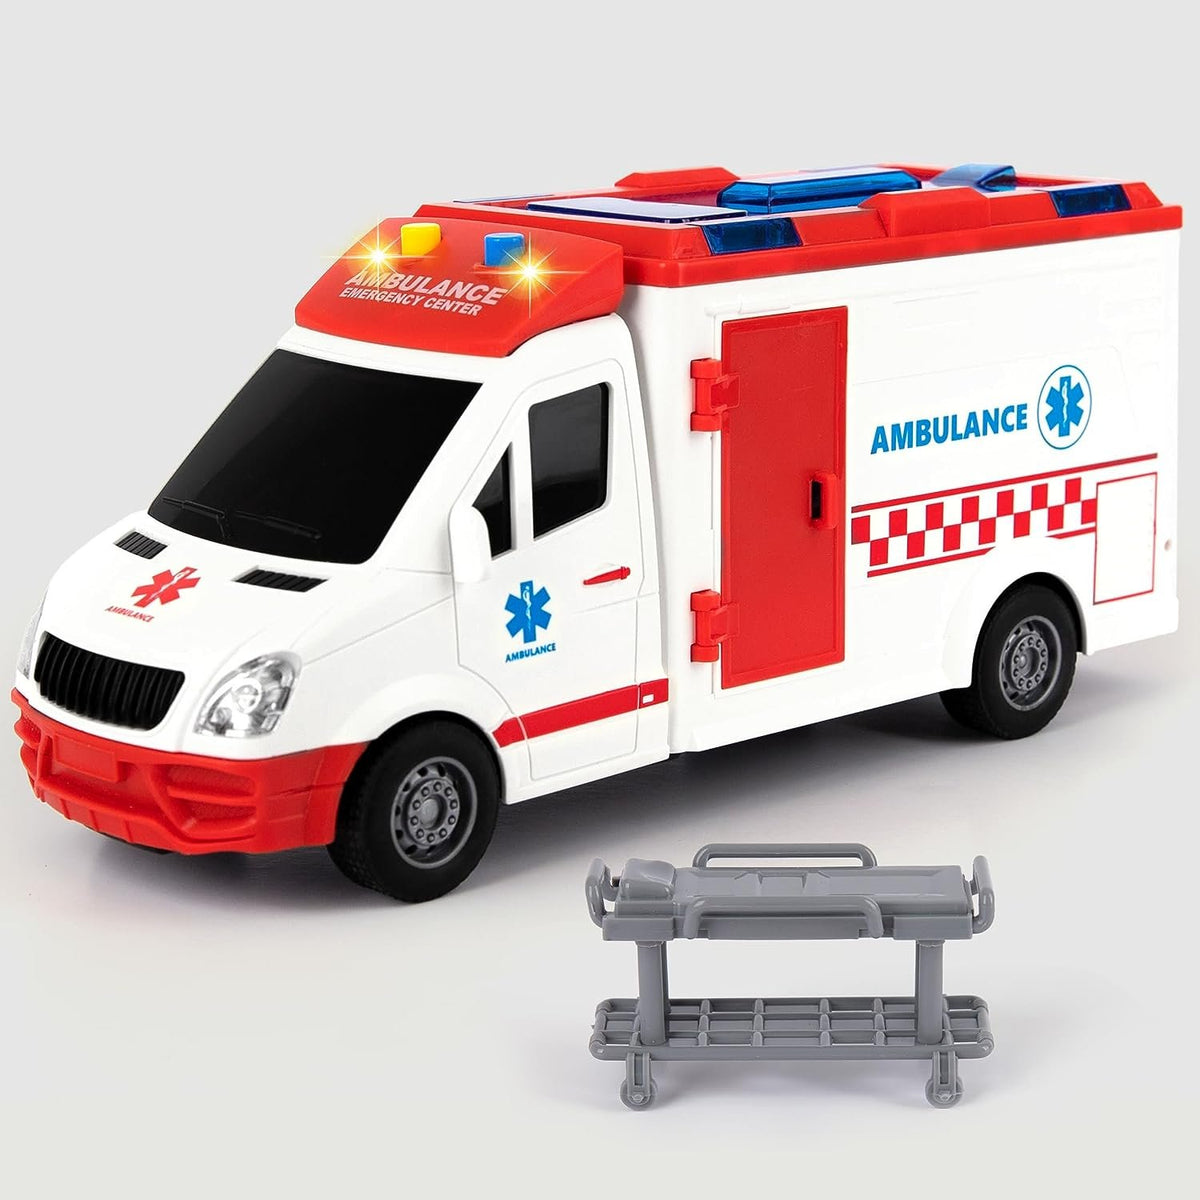 Ambulance Toy Truck for Kids Lights & Siren, Friction-Powered 1/16 Scale Rescue Toy